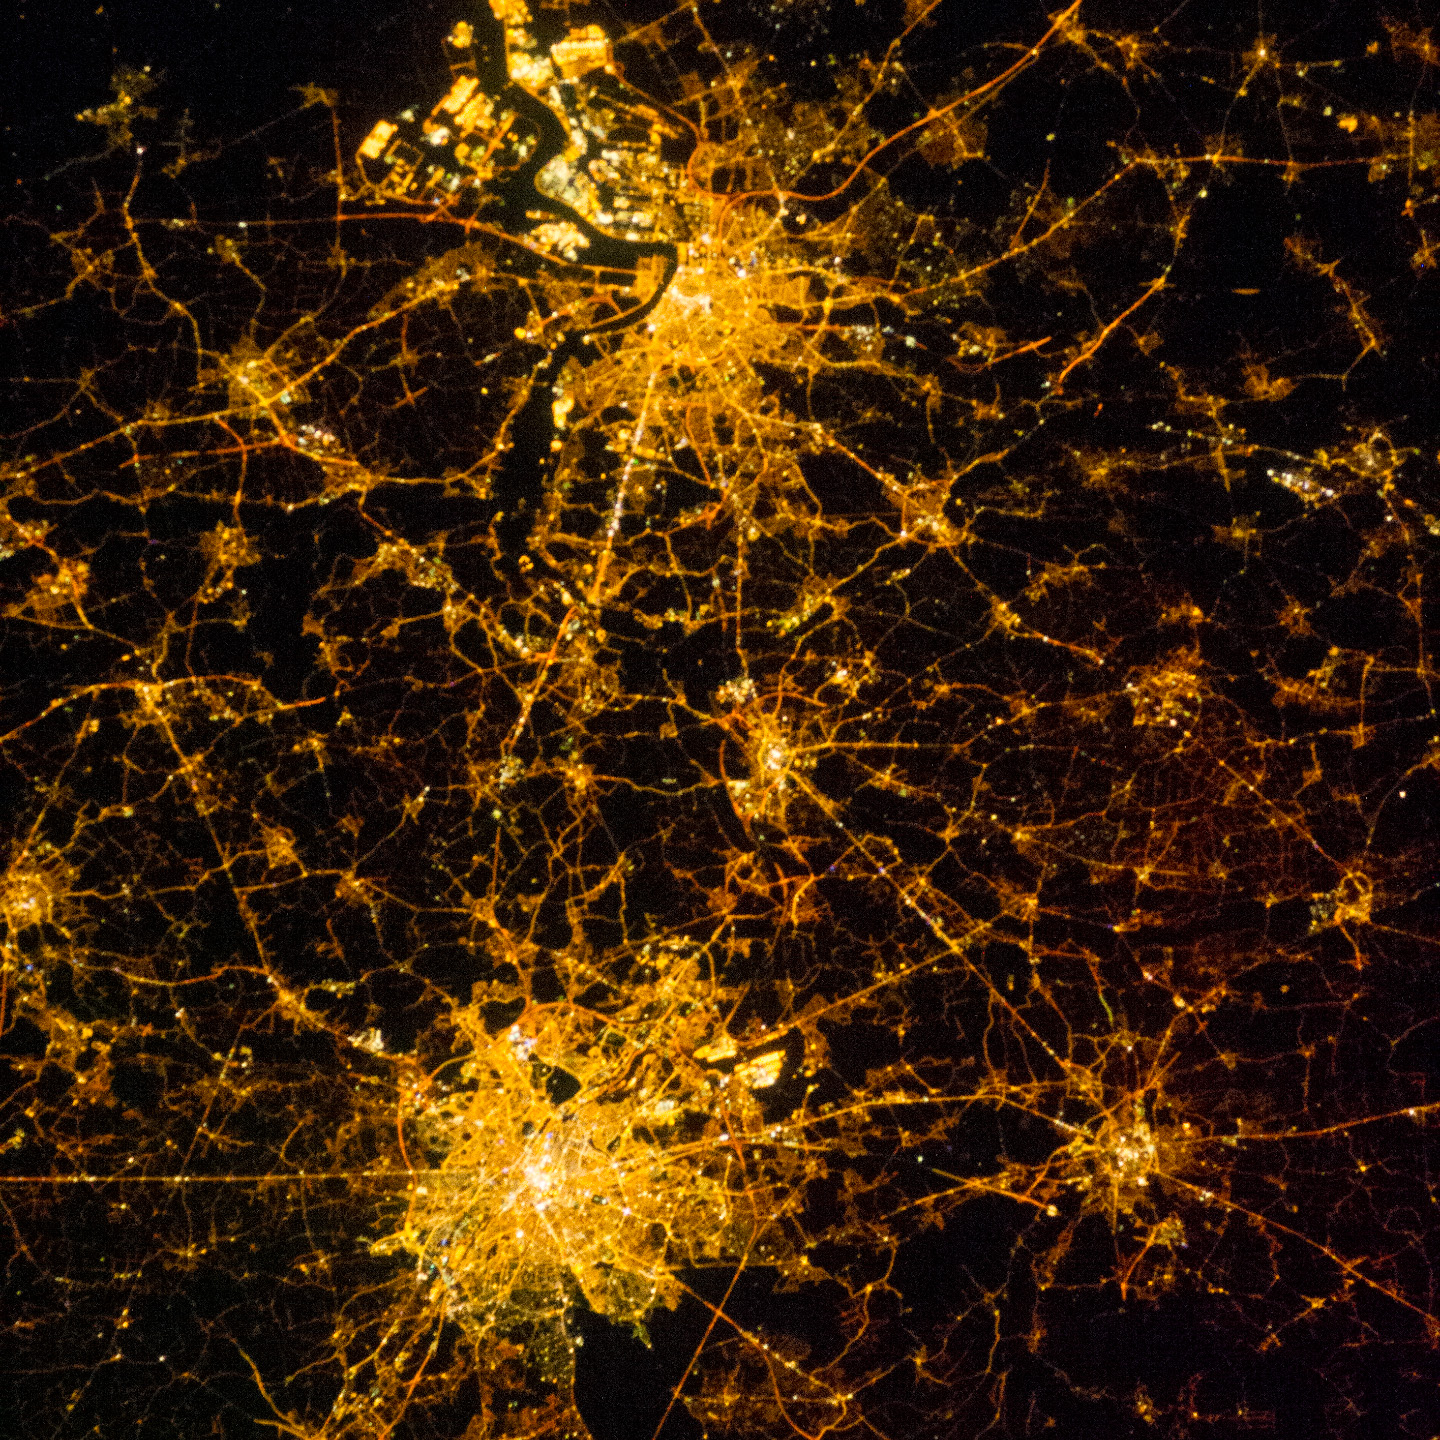 Brussels and Antwerp at Night